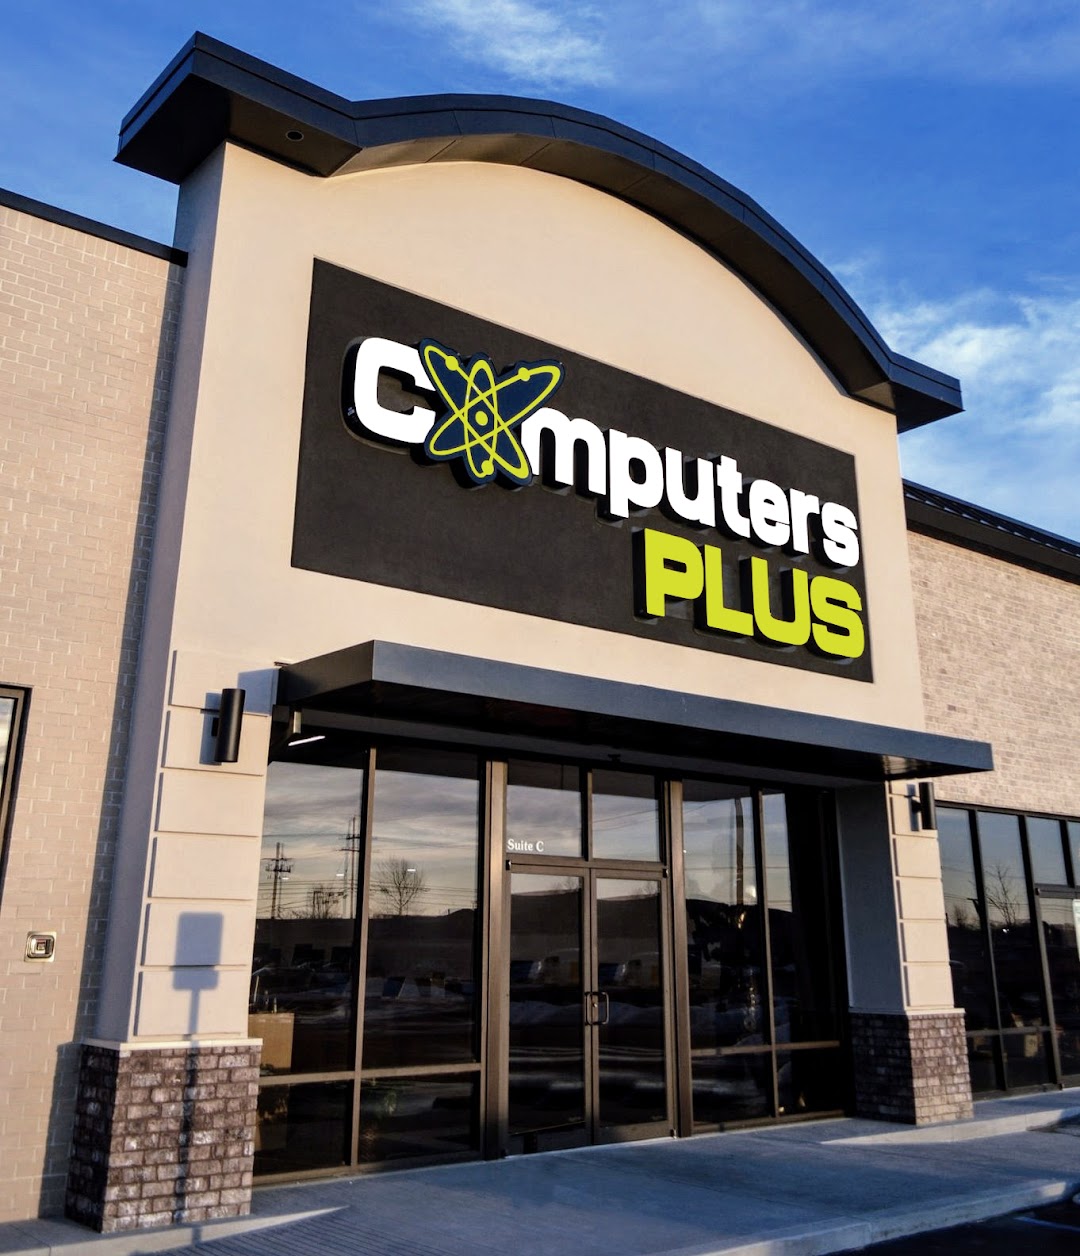 Computers Plus - Computer Store, Sales, Repairs, Networks, Support and Installation